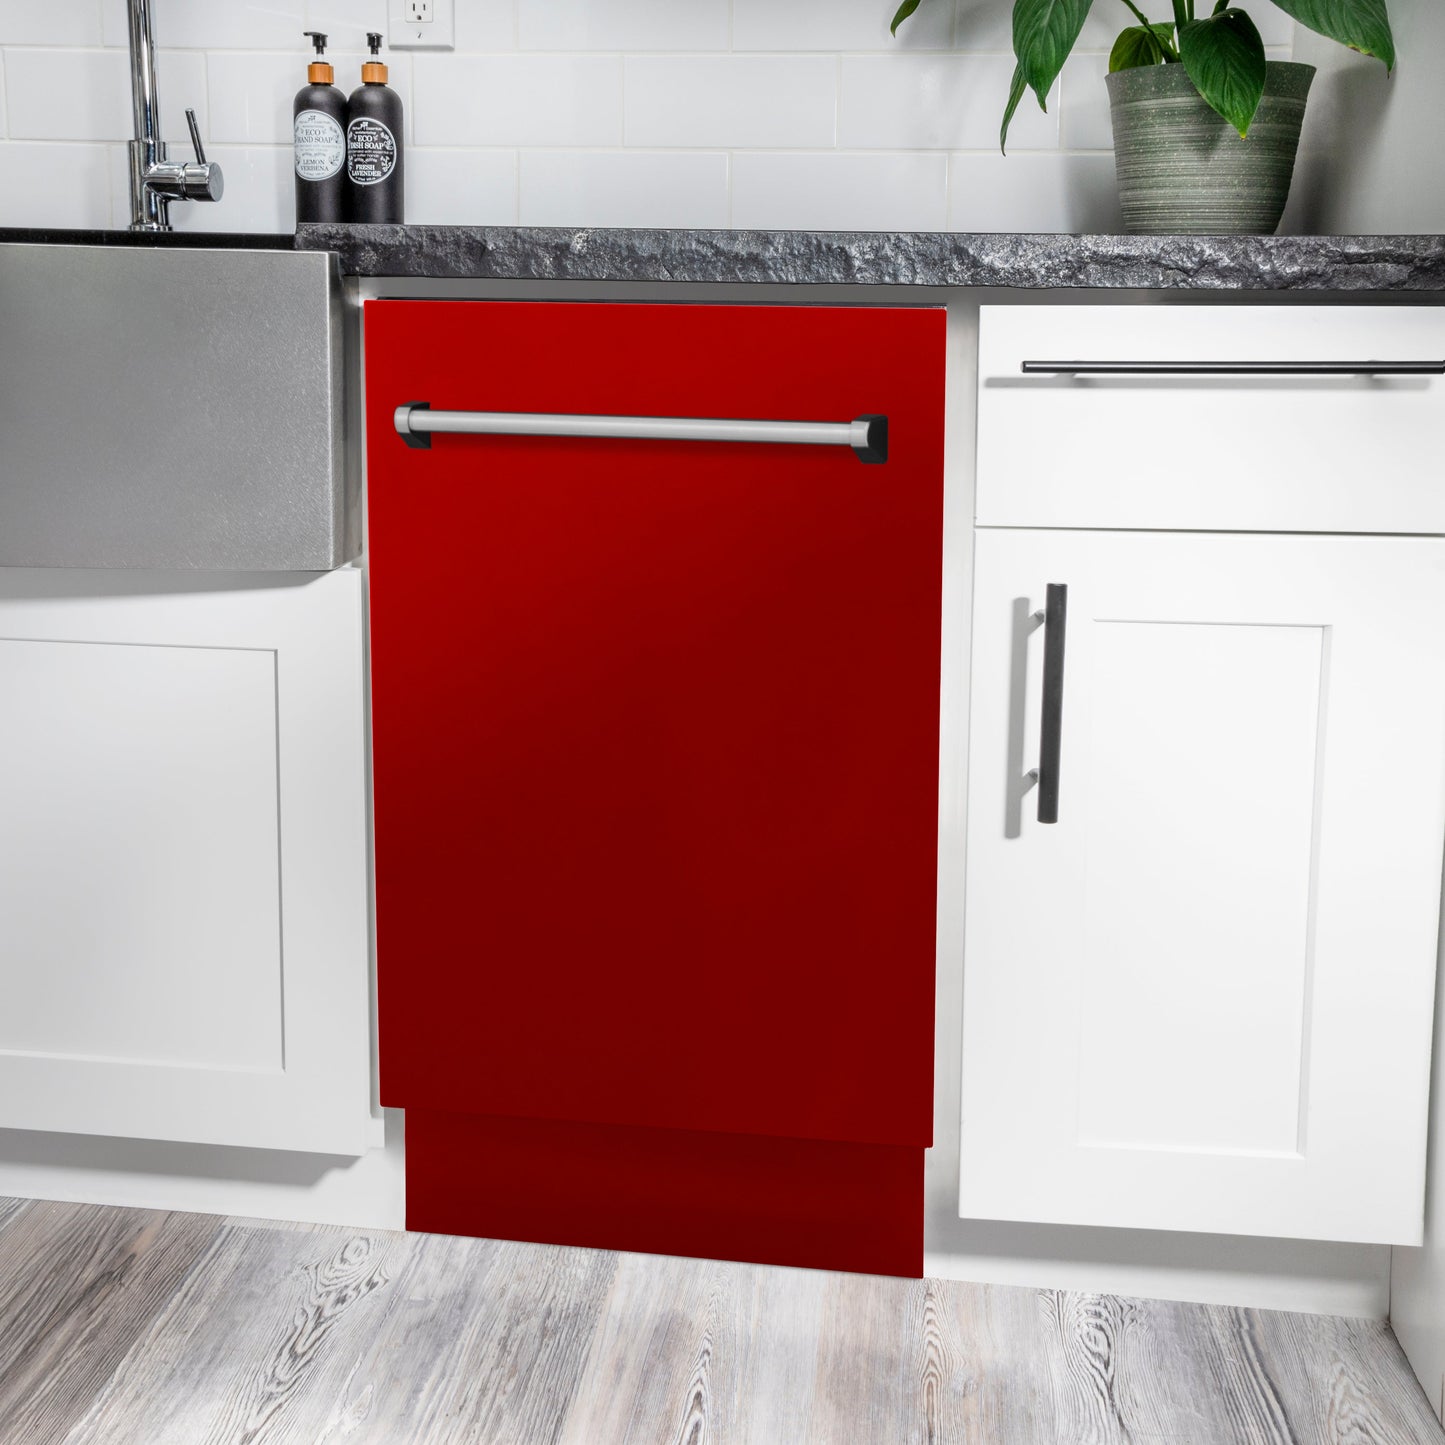 ZLINE 18 in. Tallac Series 3rd Rack Top Control Dishwasher in a Stainless Steel Tub with Red Gloss, 51dBa (DWV-RG-18)